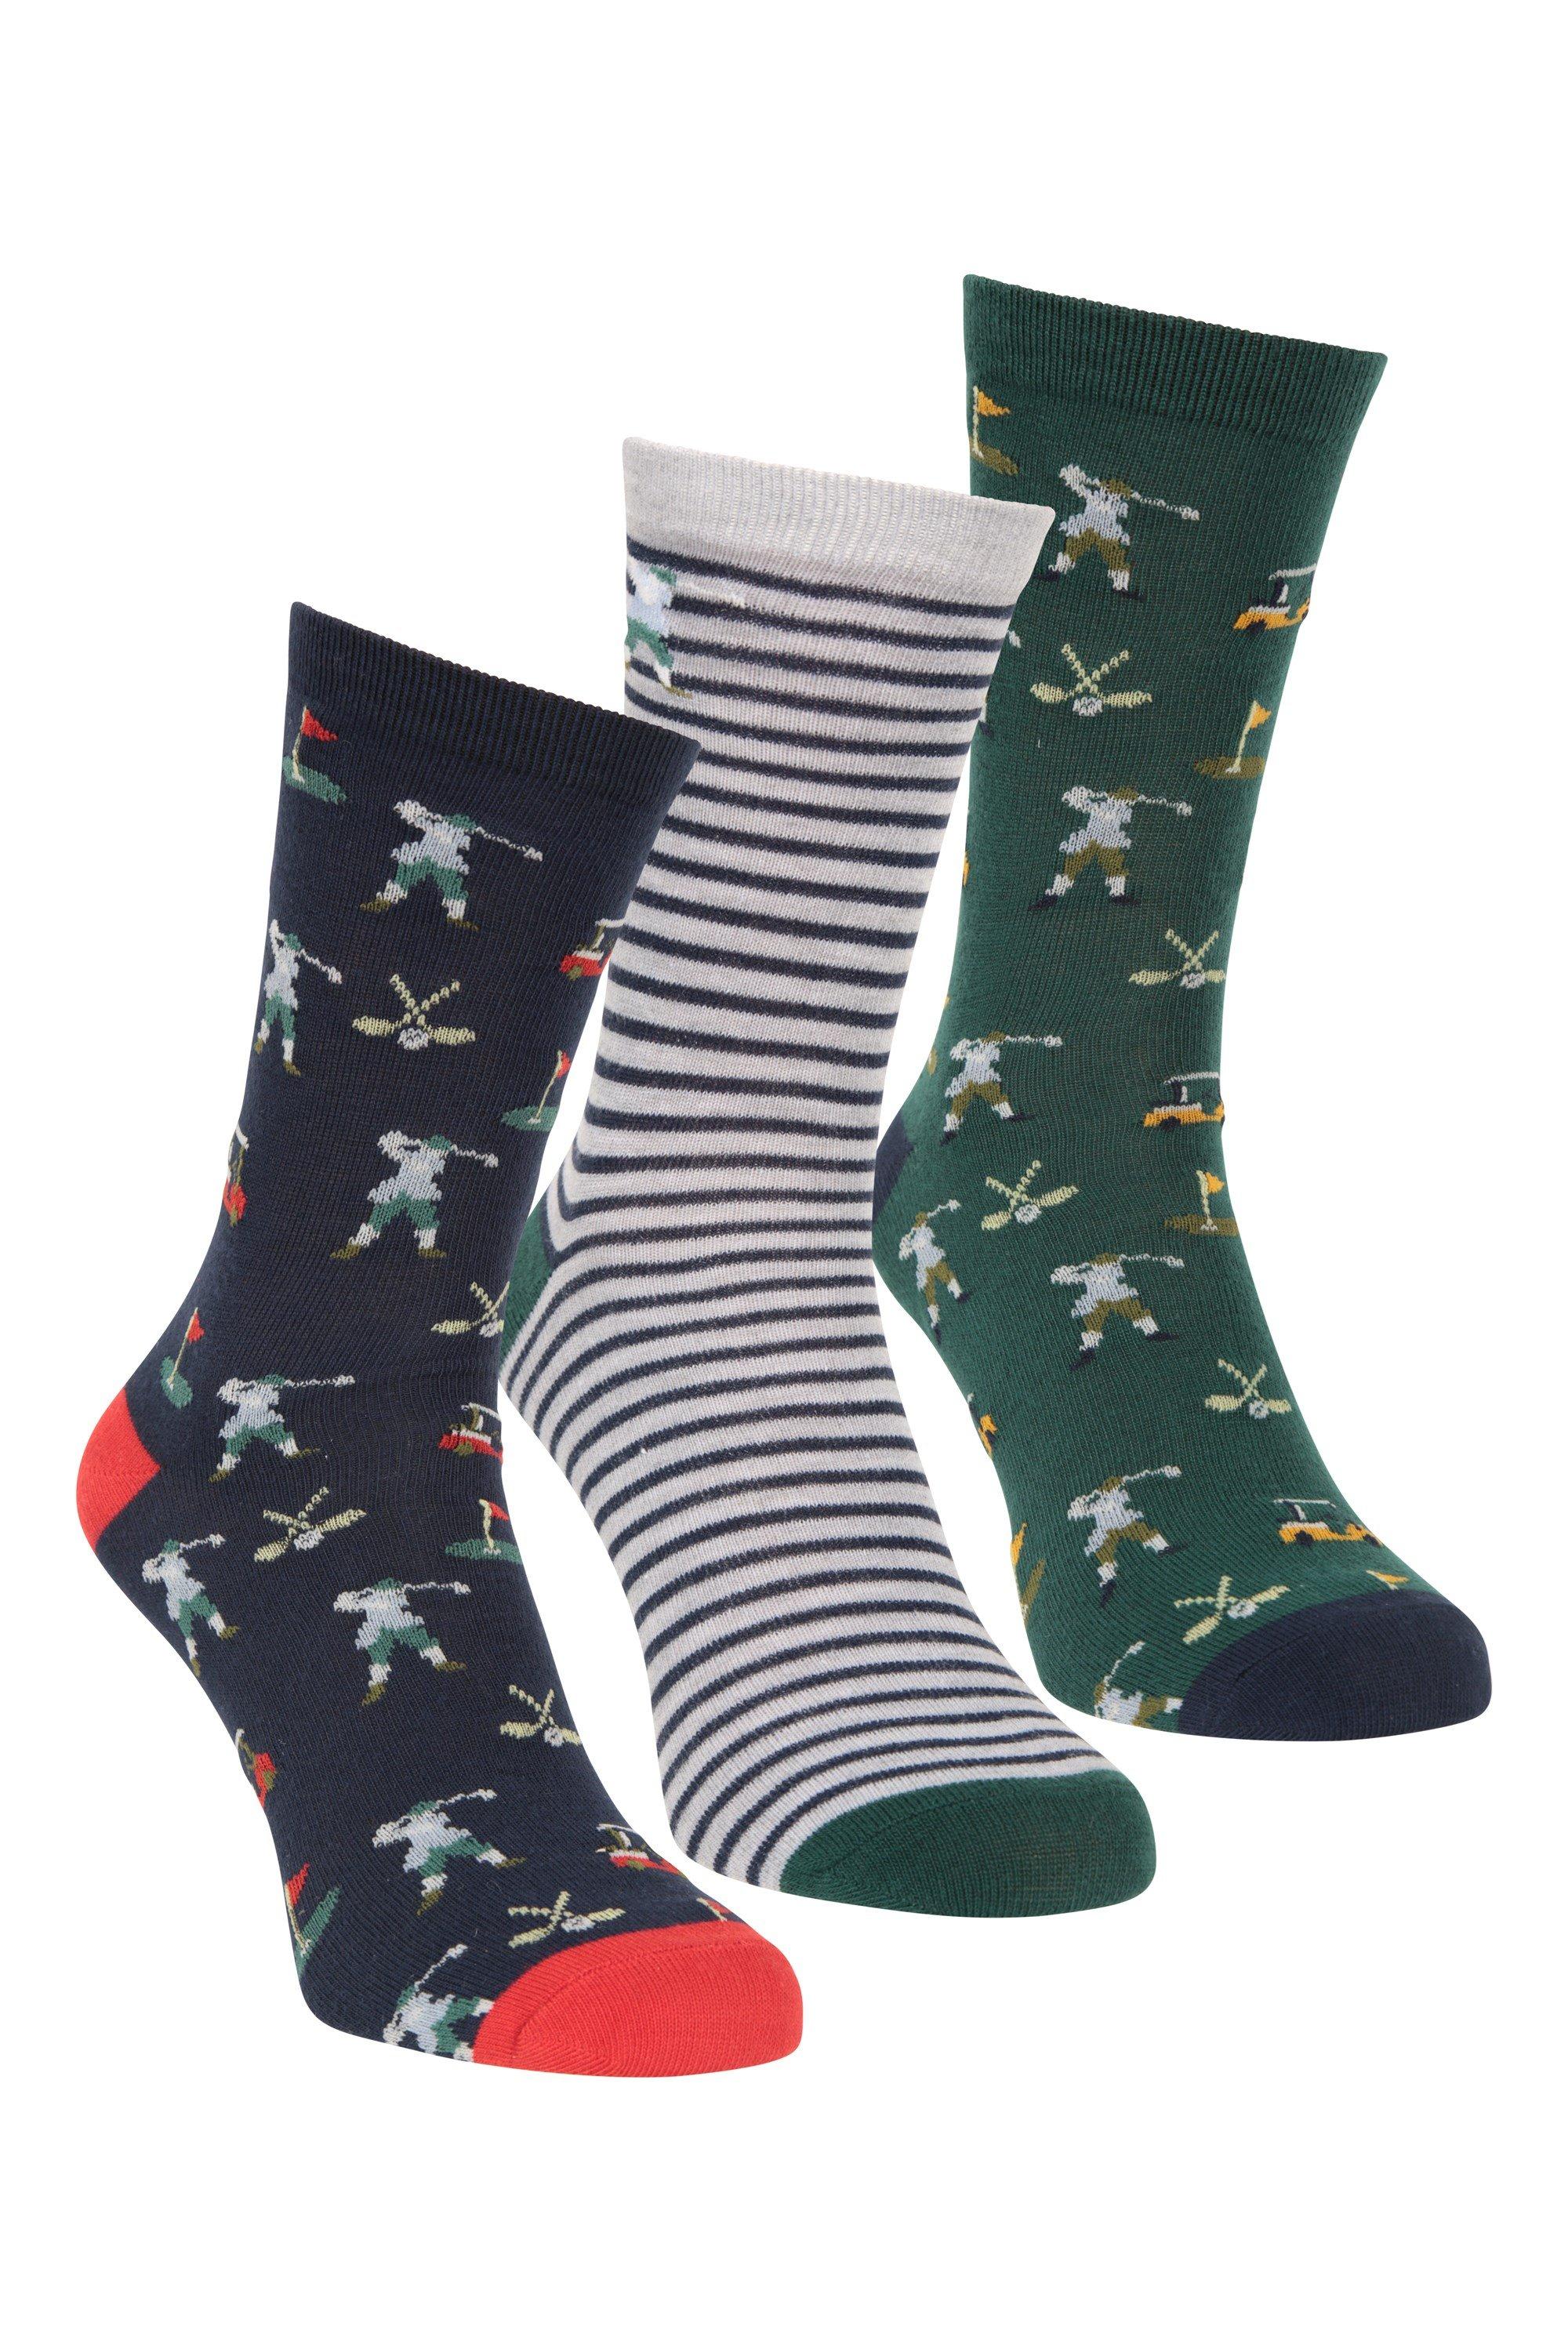 Golf Motif Recycled Socks Casual Warm Sock Pack of 3